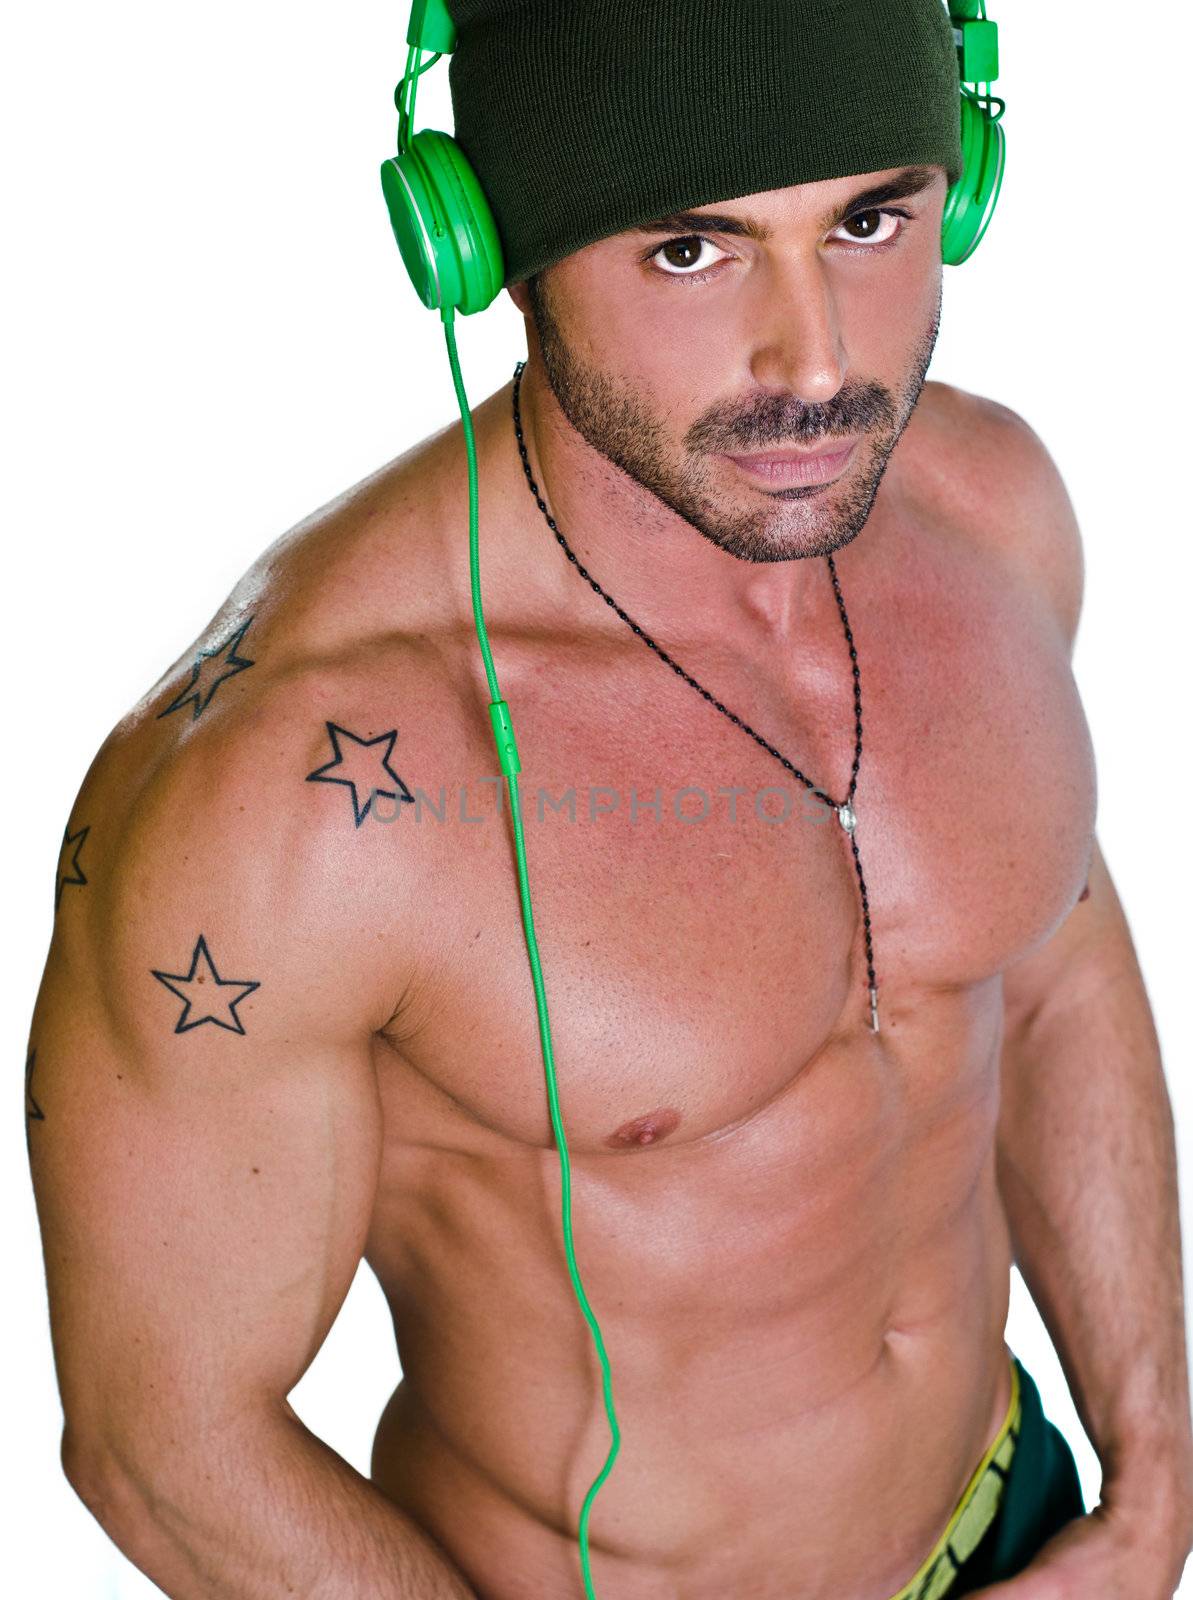 Muscular tanned shirtless man with headphones by artofphoto